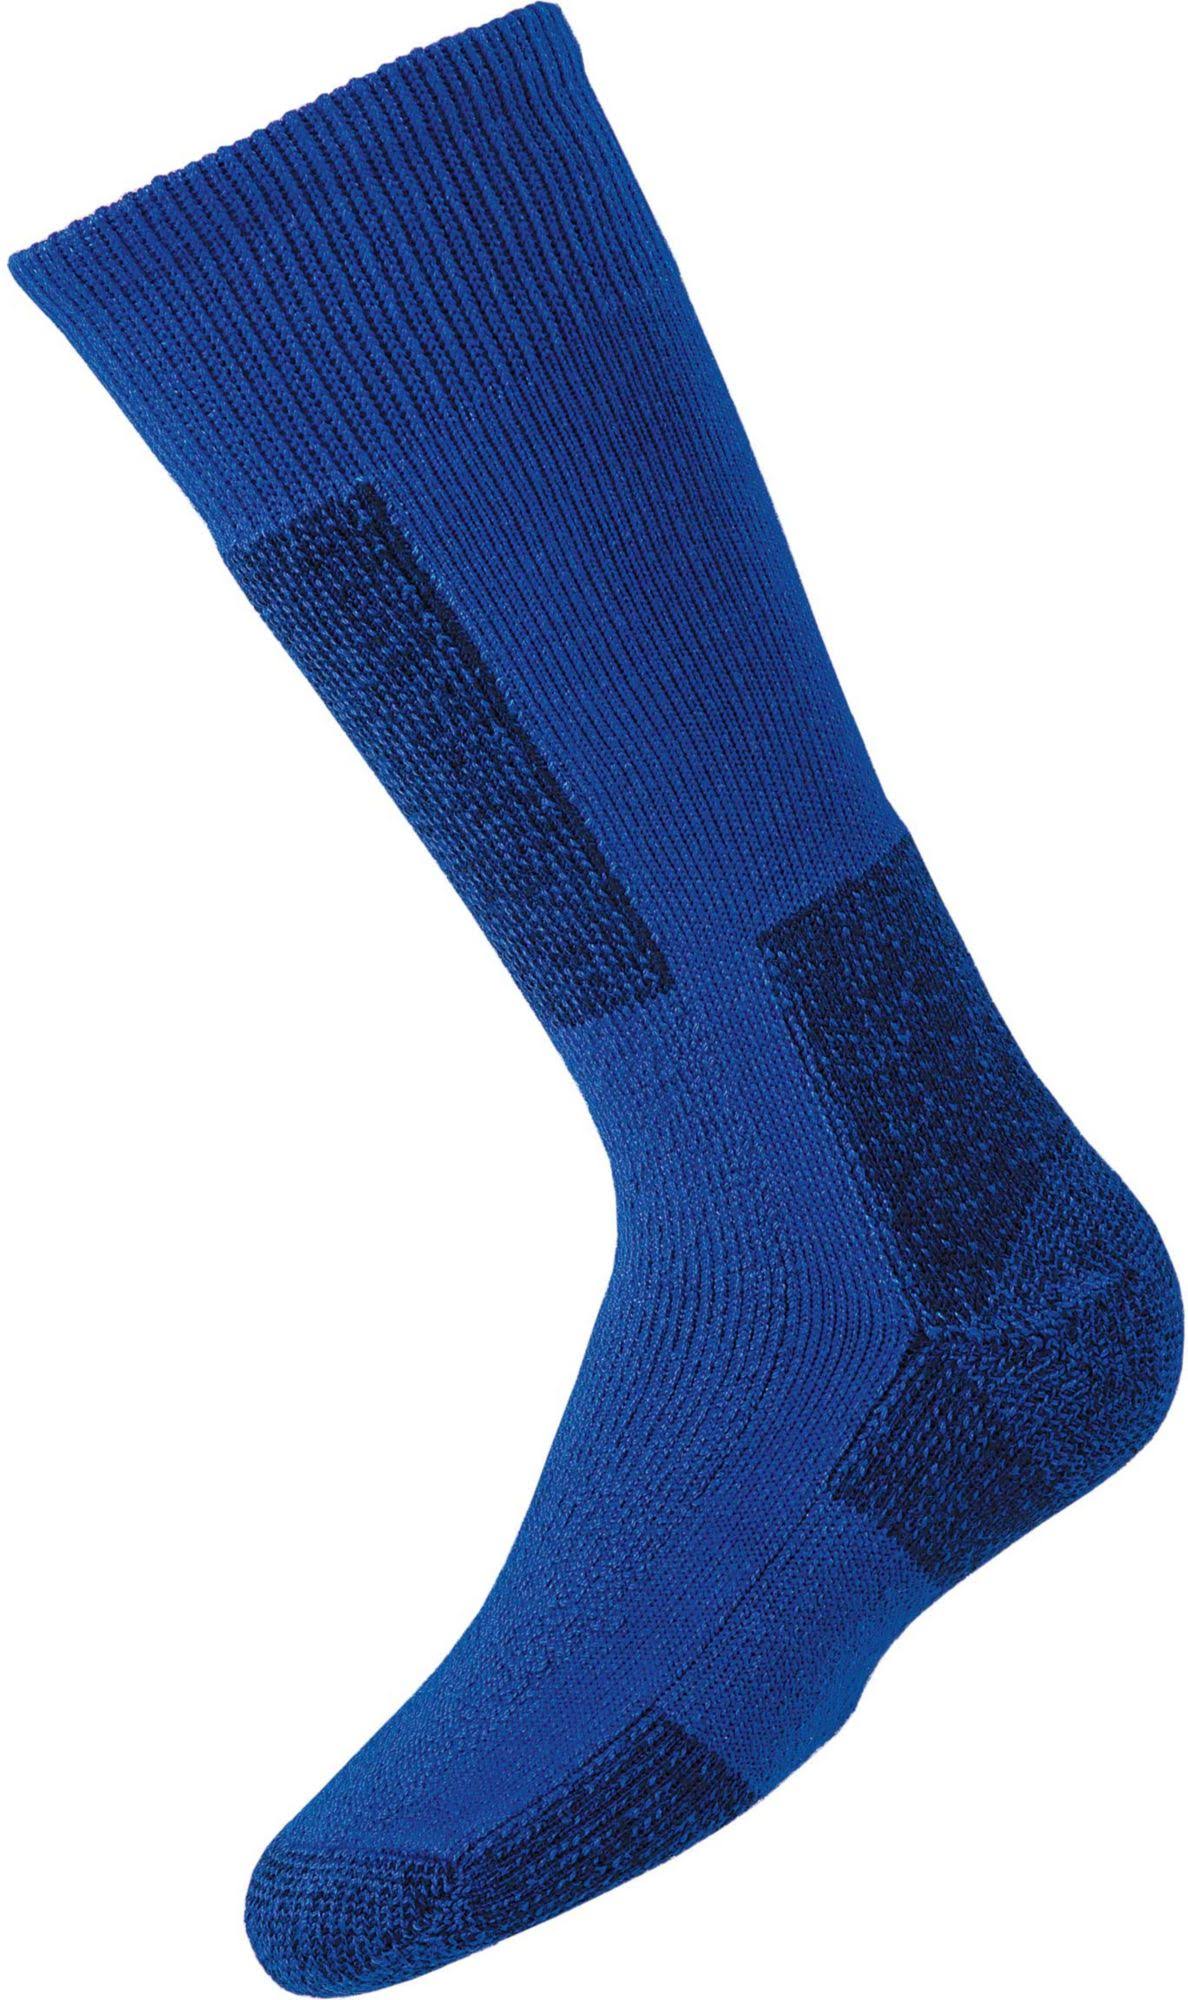 Thorlos Moderate Padded Over the Calf Snow Socks - Blue, Small